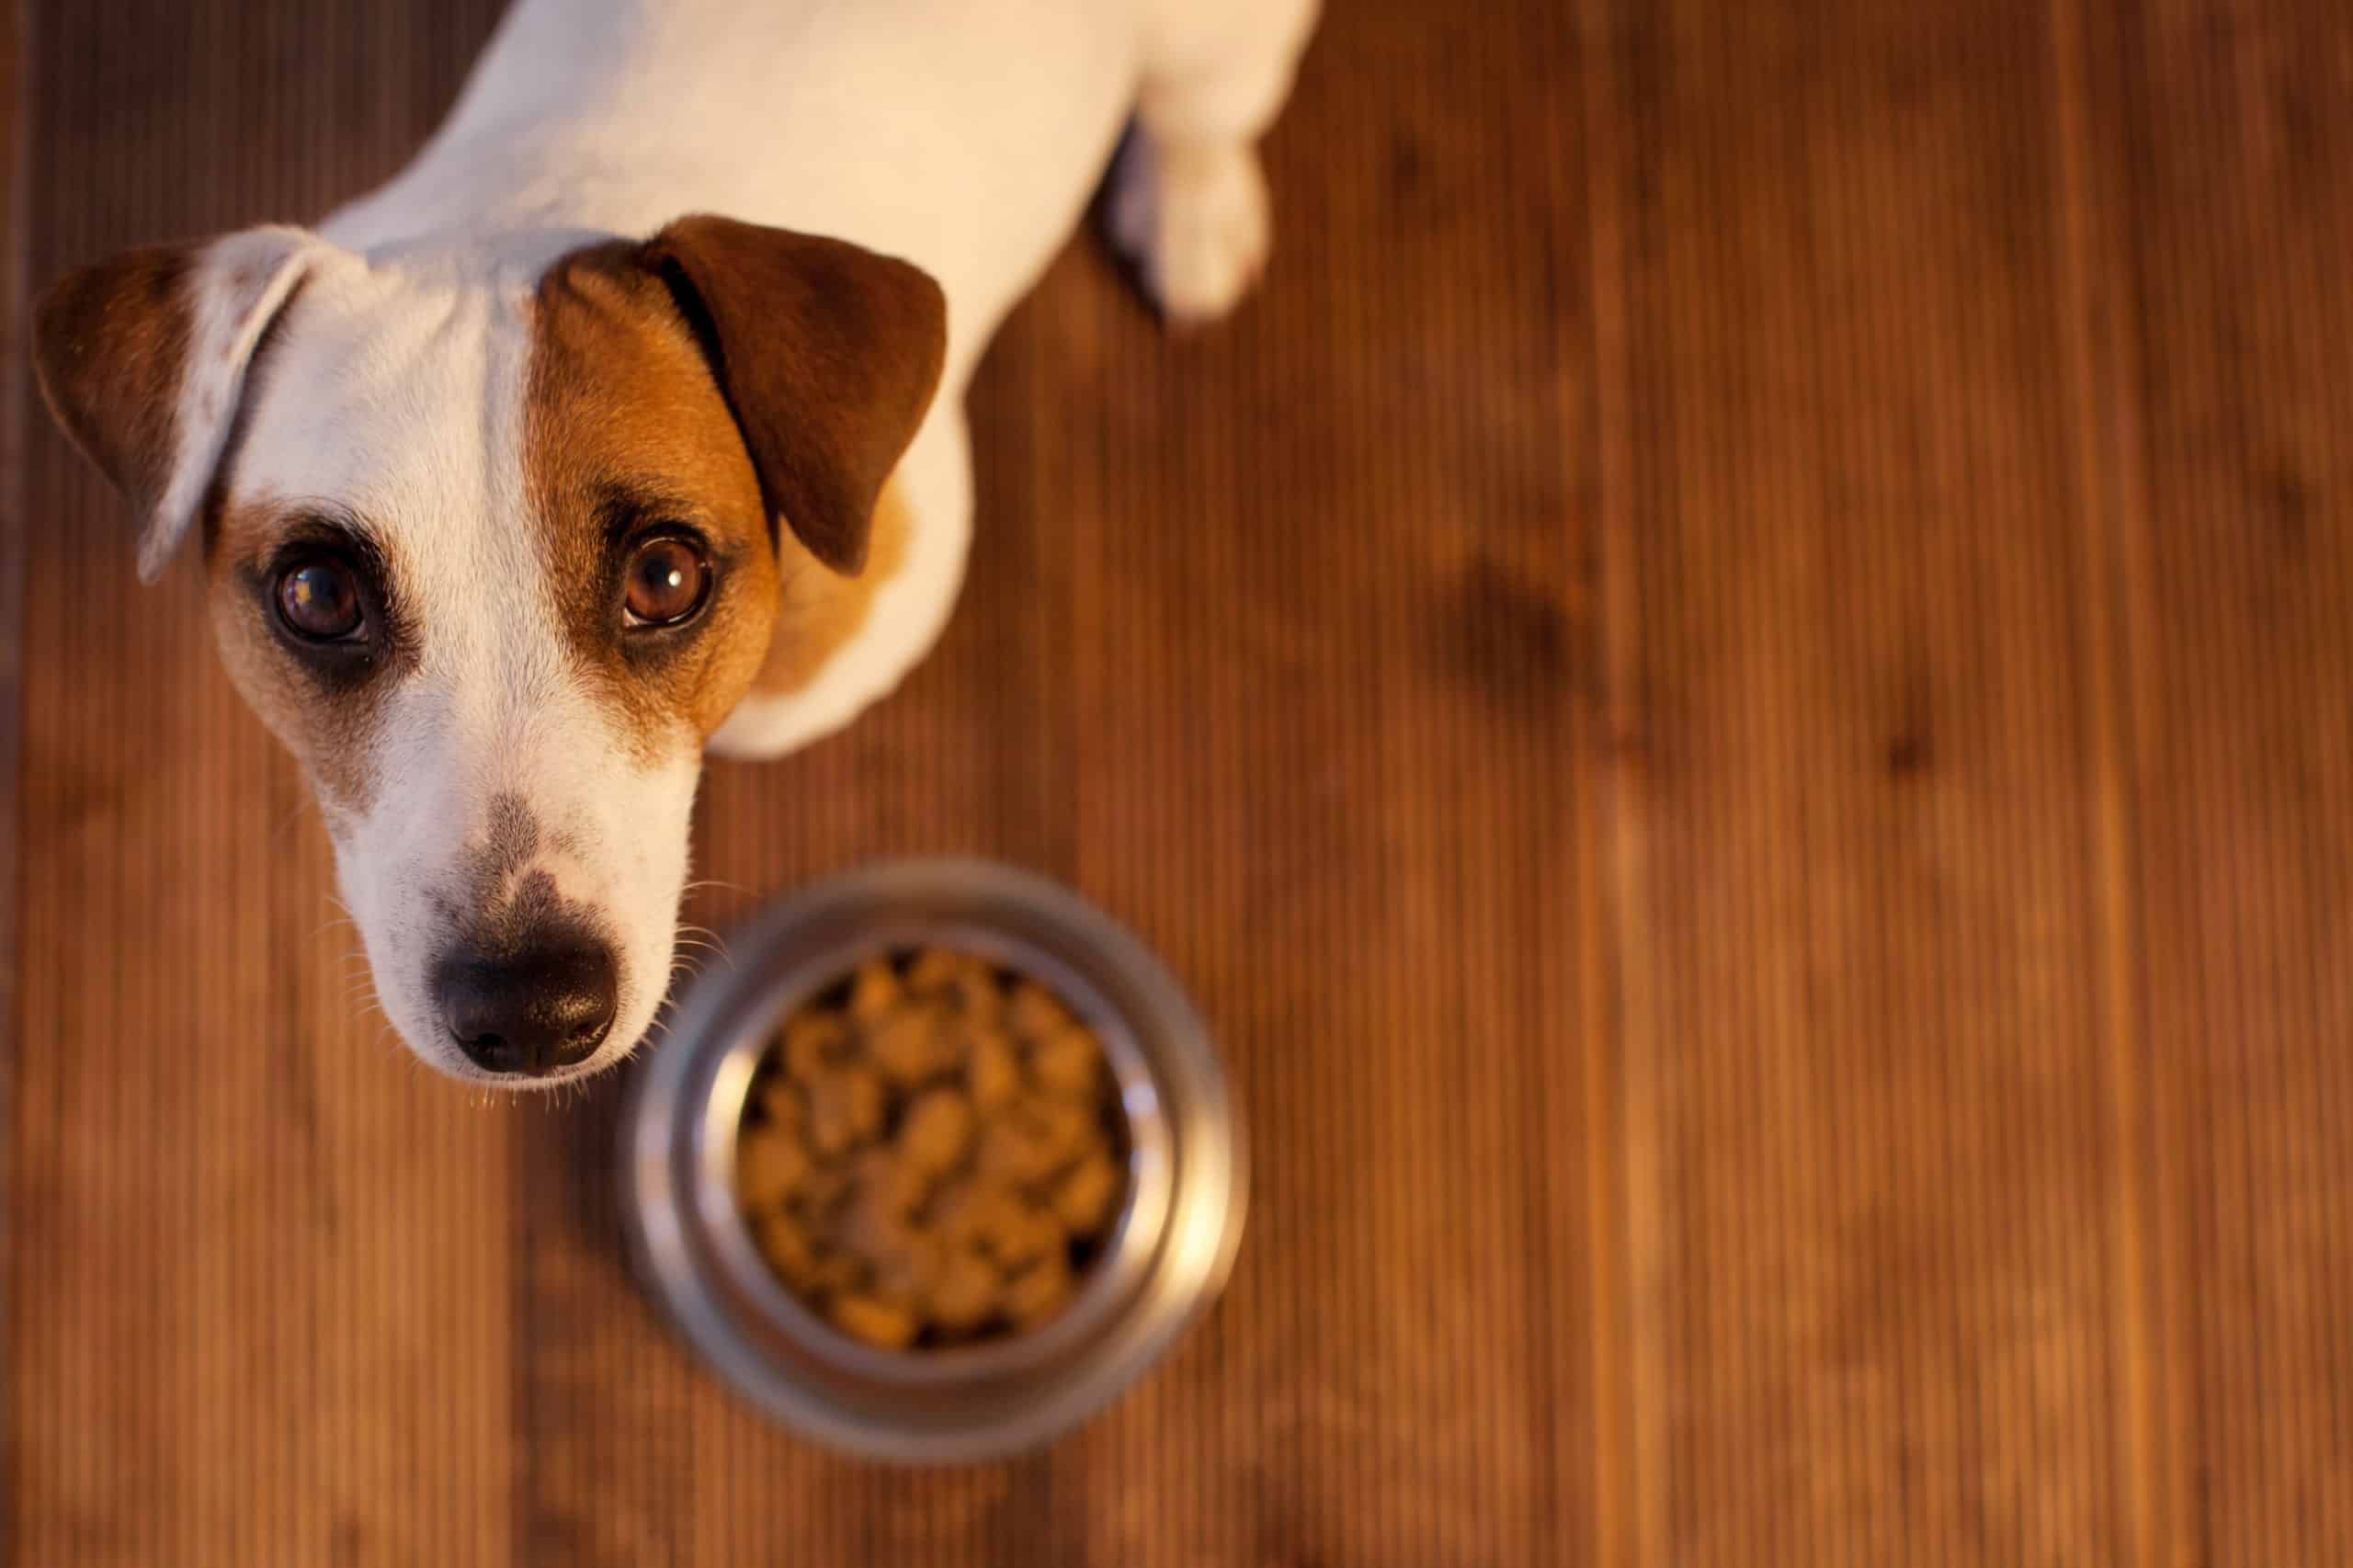 Is it ok for dogs to eat out of the same bowl?